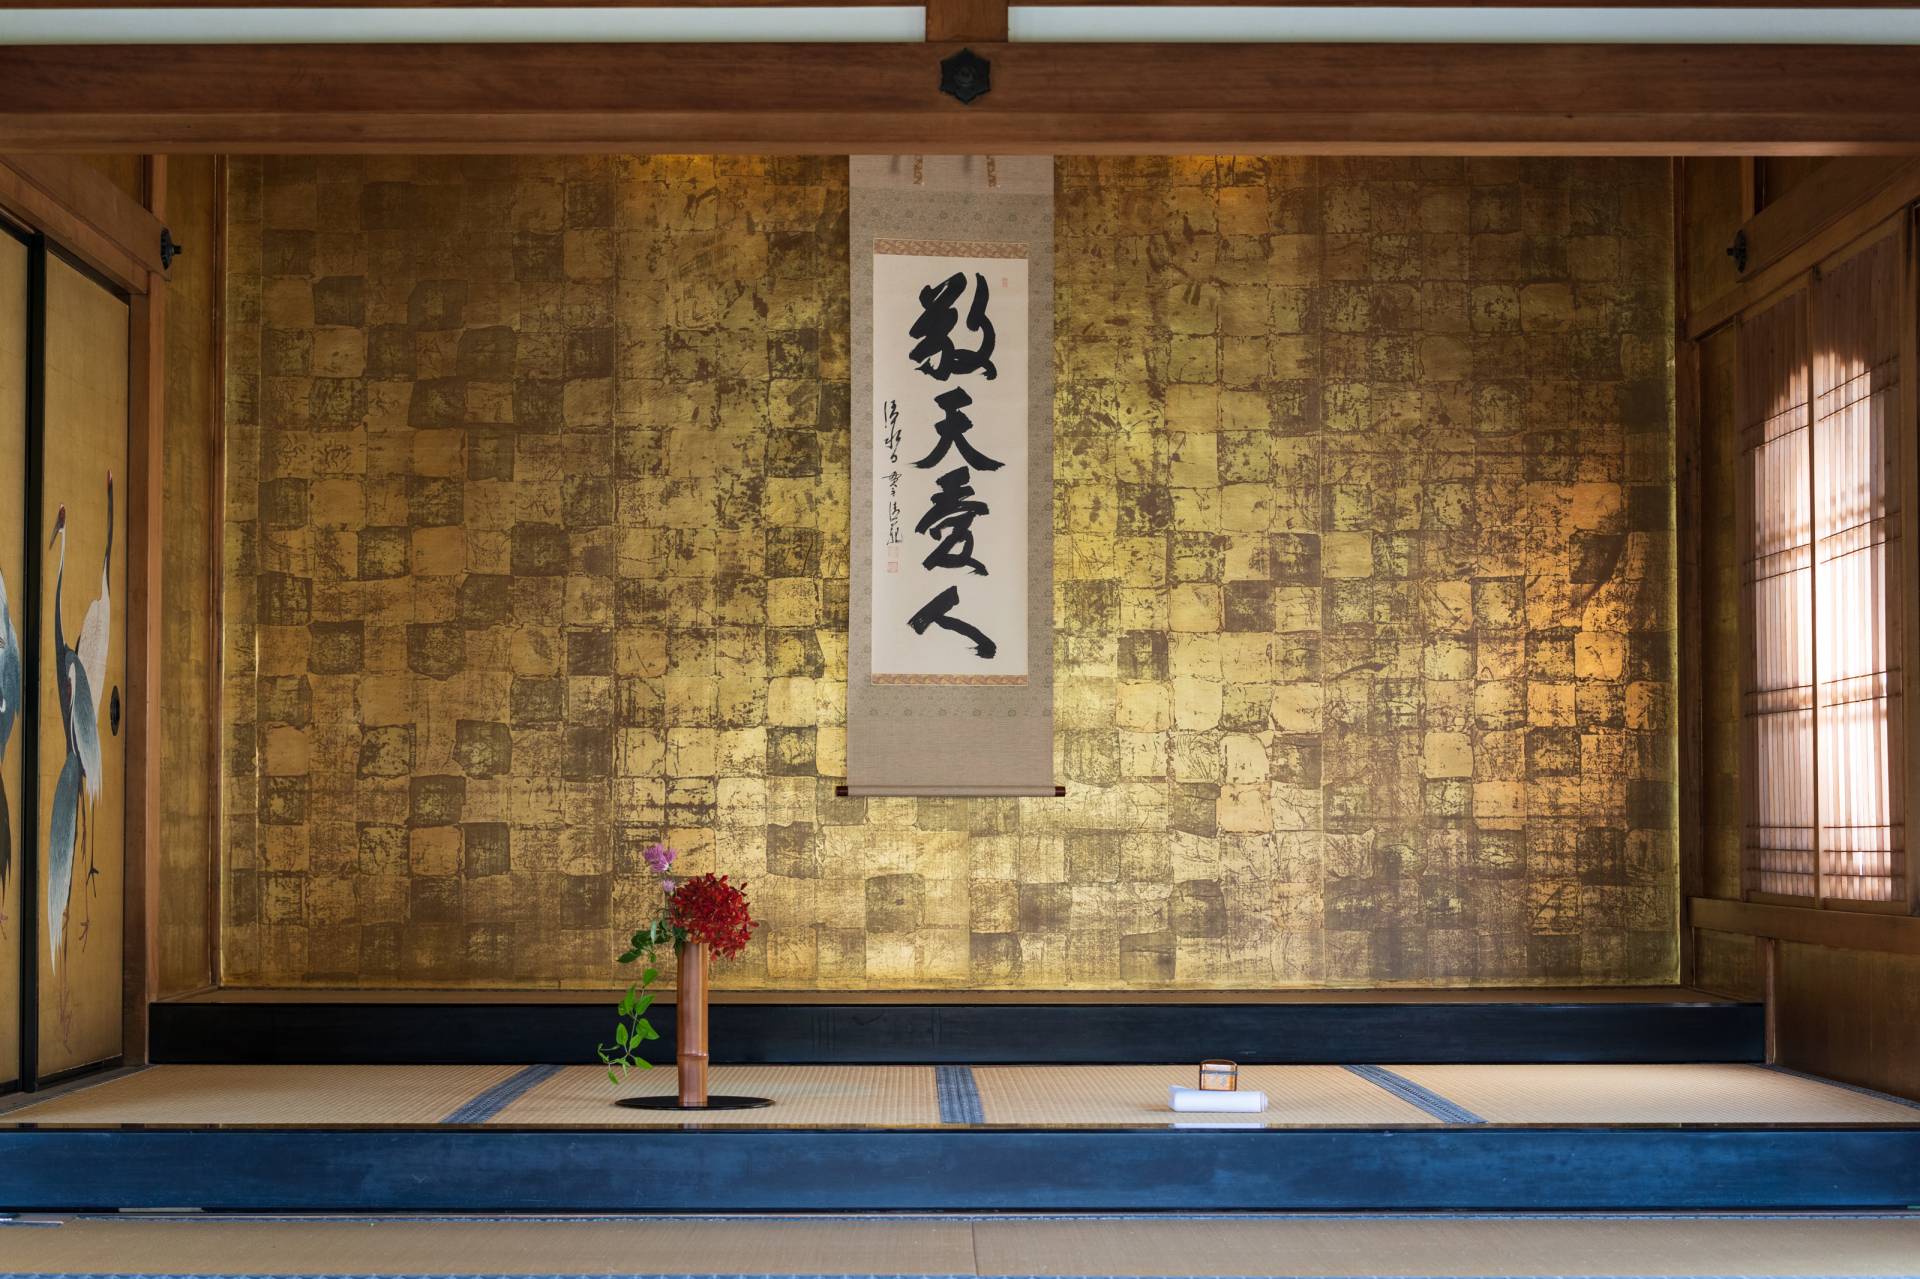 The room was prepared by the iemoto with a hanging scroll and flowers he had arranged.